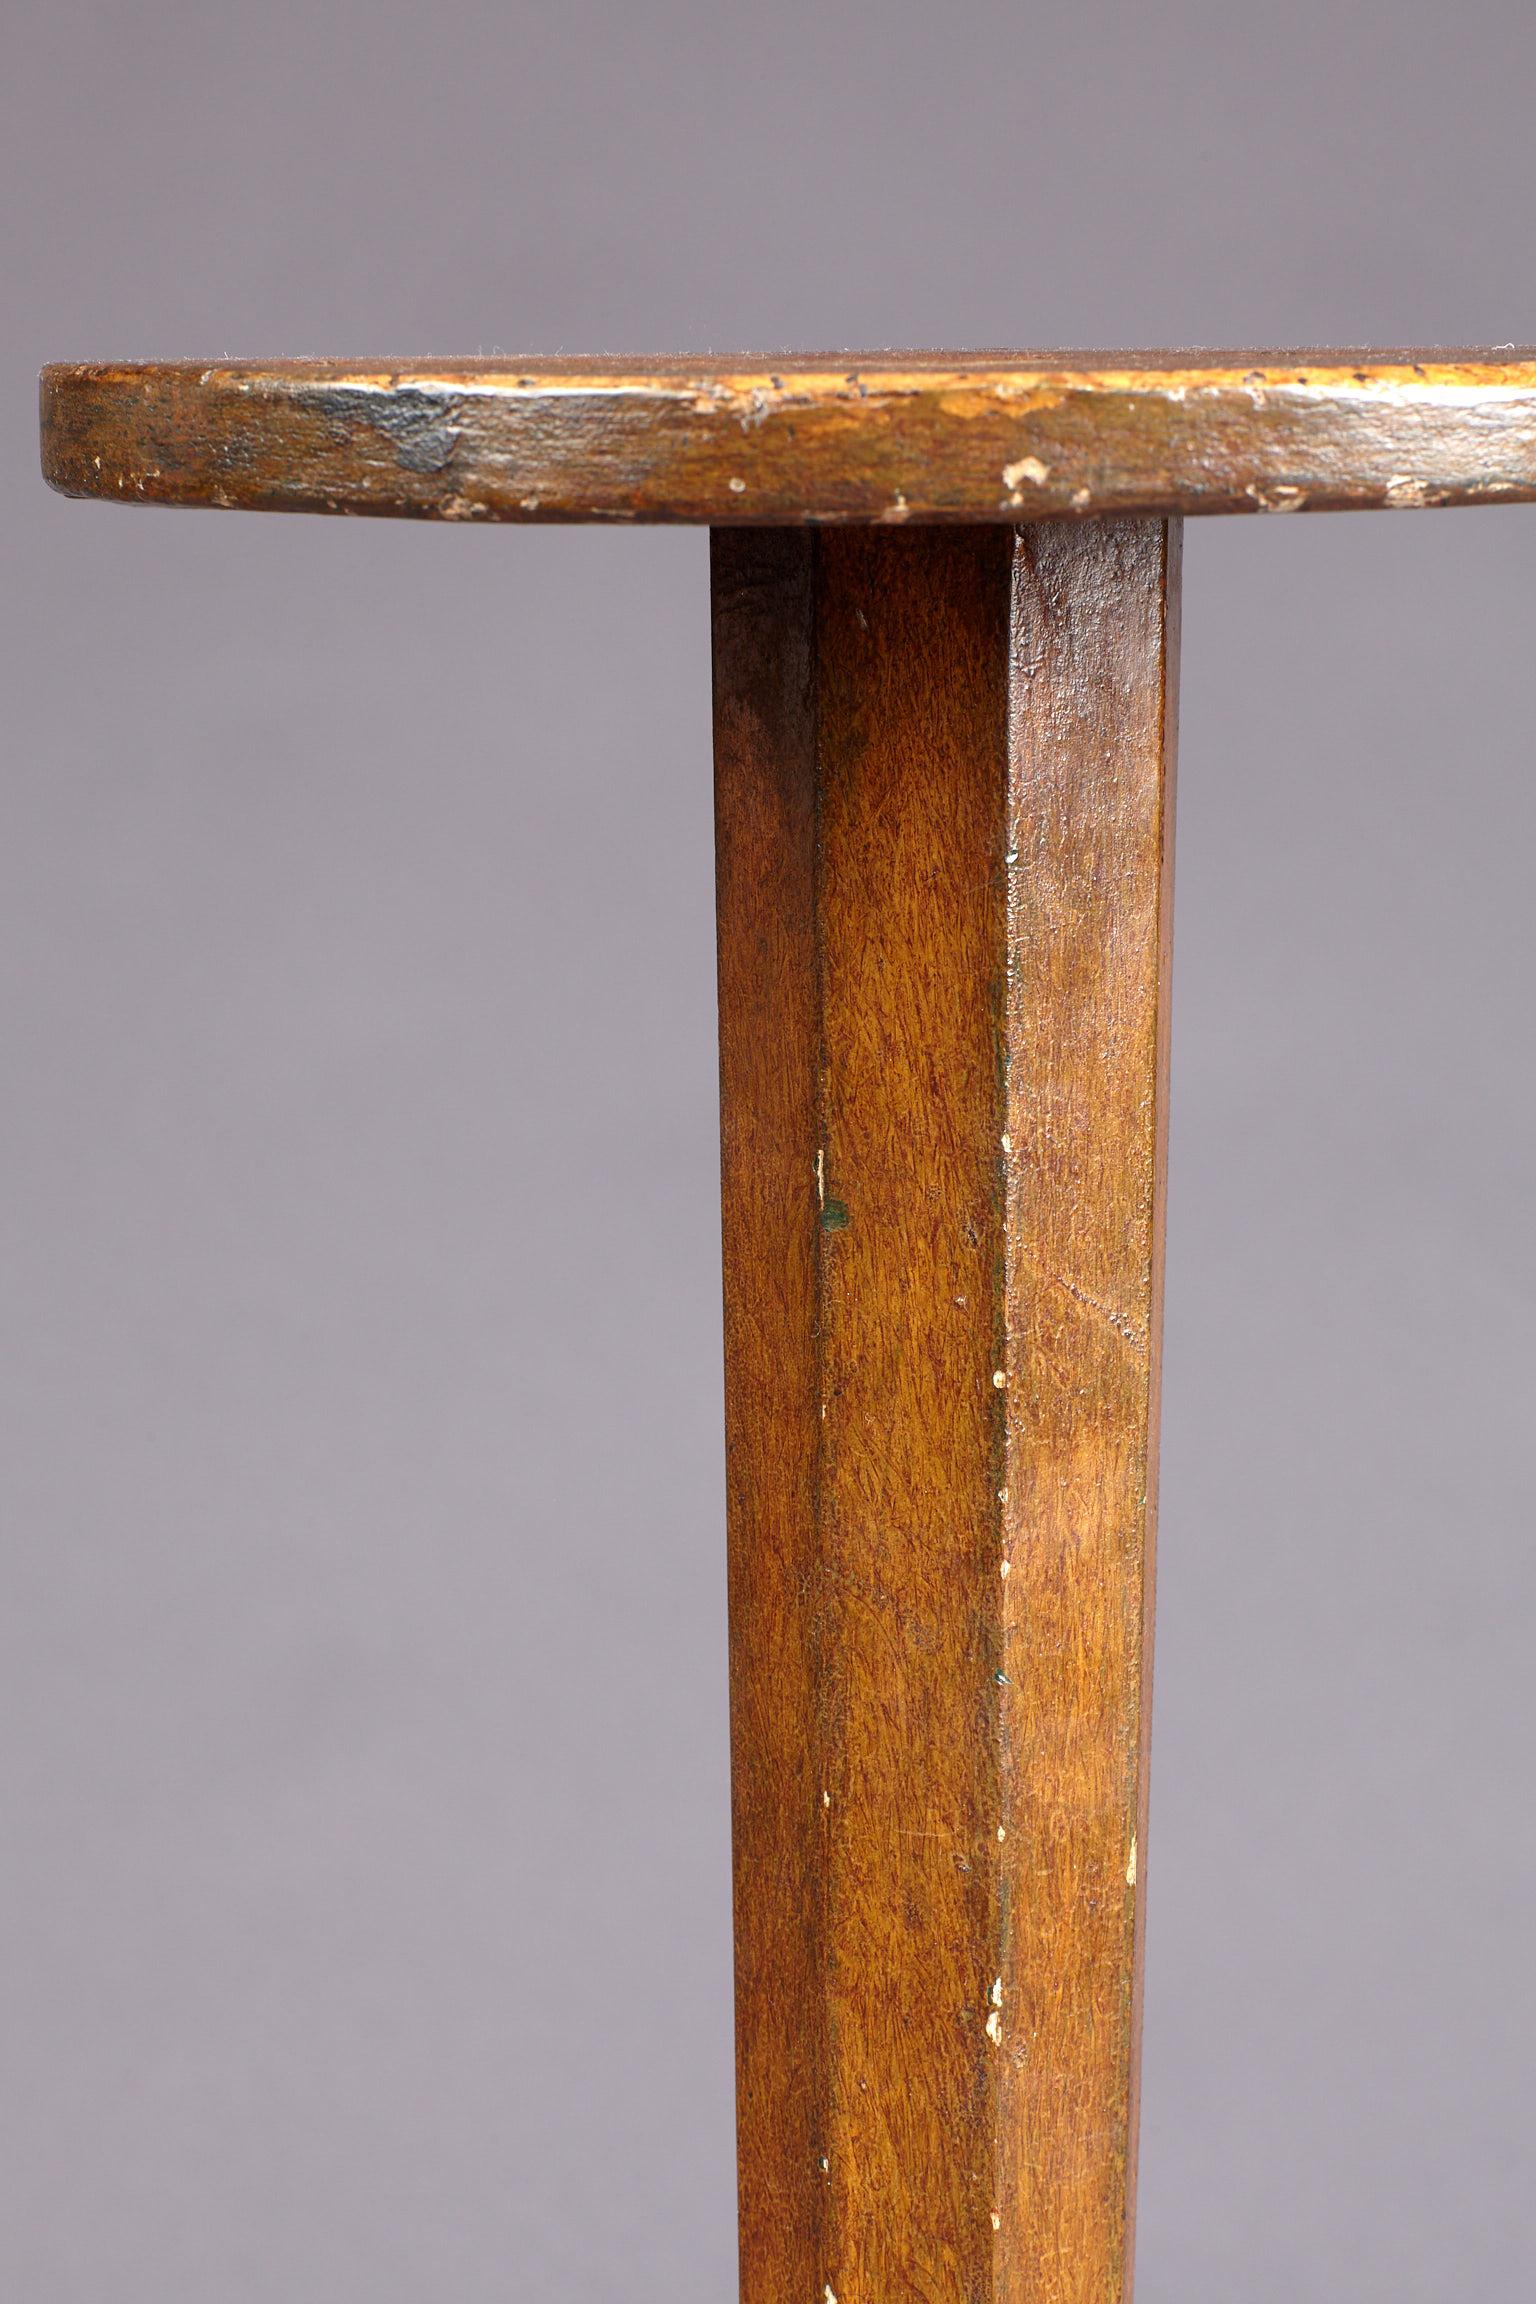 Painted Oak Candle-Stand, Early 18th Century, Queen Anne, England, circa 1710 (Eichenholz) im Angebot